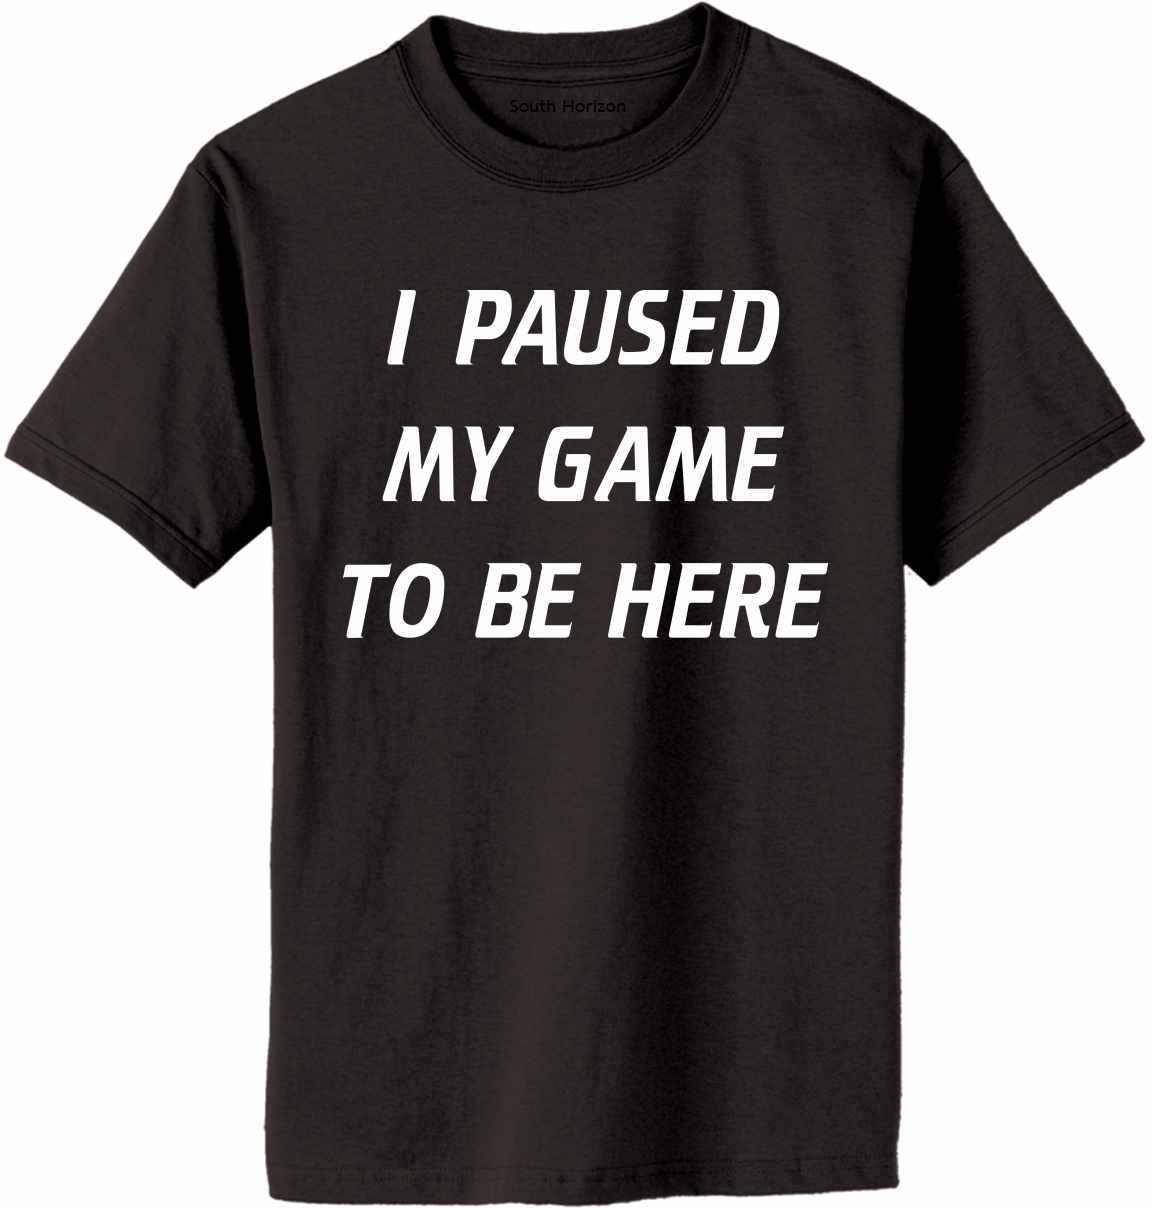 I Paused My Game to Be Here Adult T-Shirt